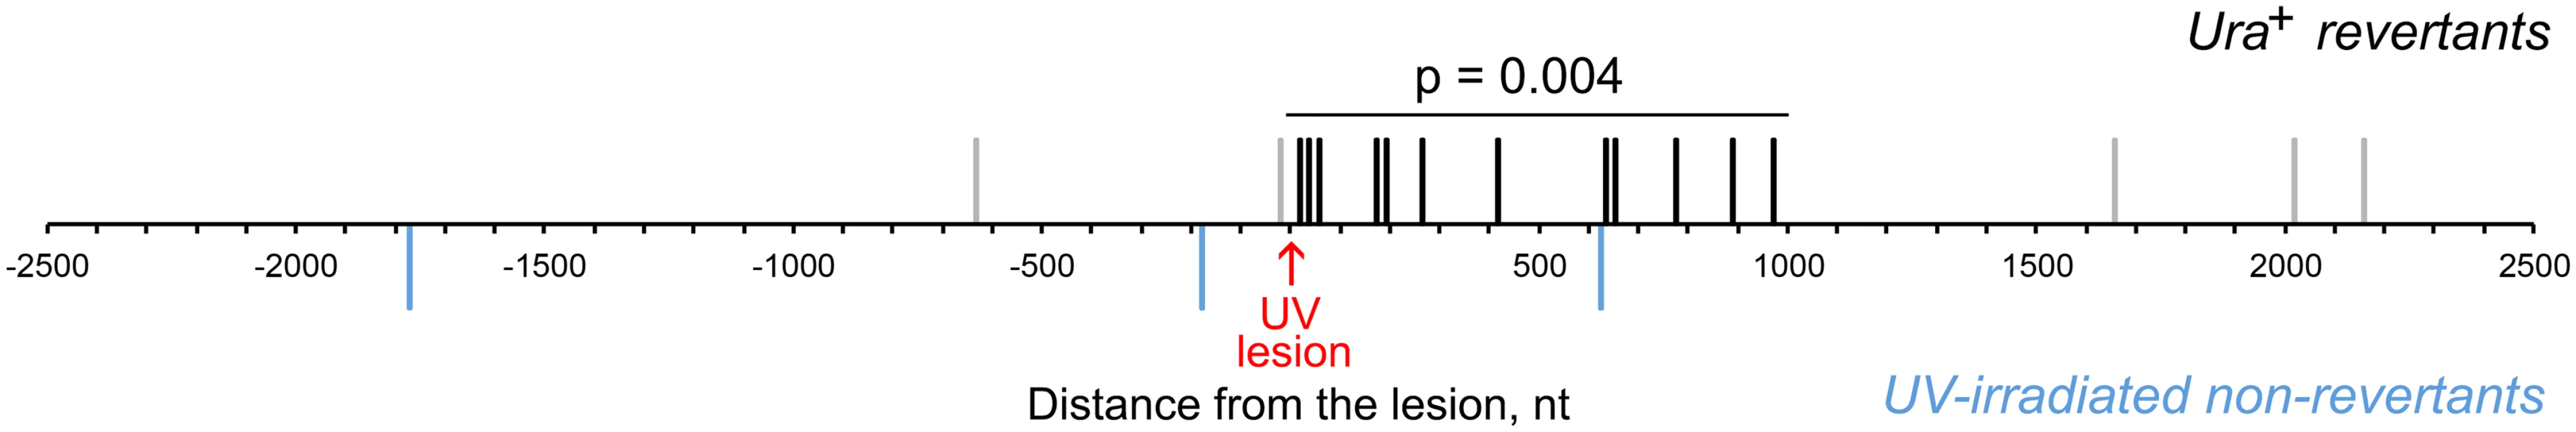 UV lesion bypass is associated with increased mutagenesis downstream of the lesion.